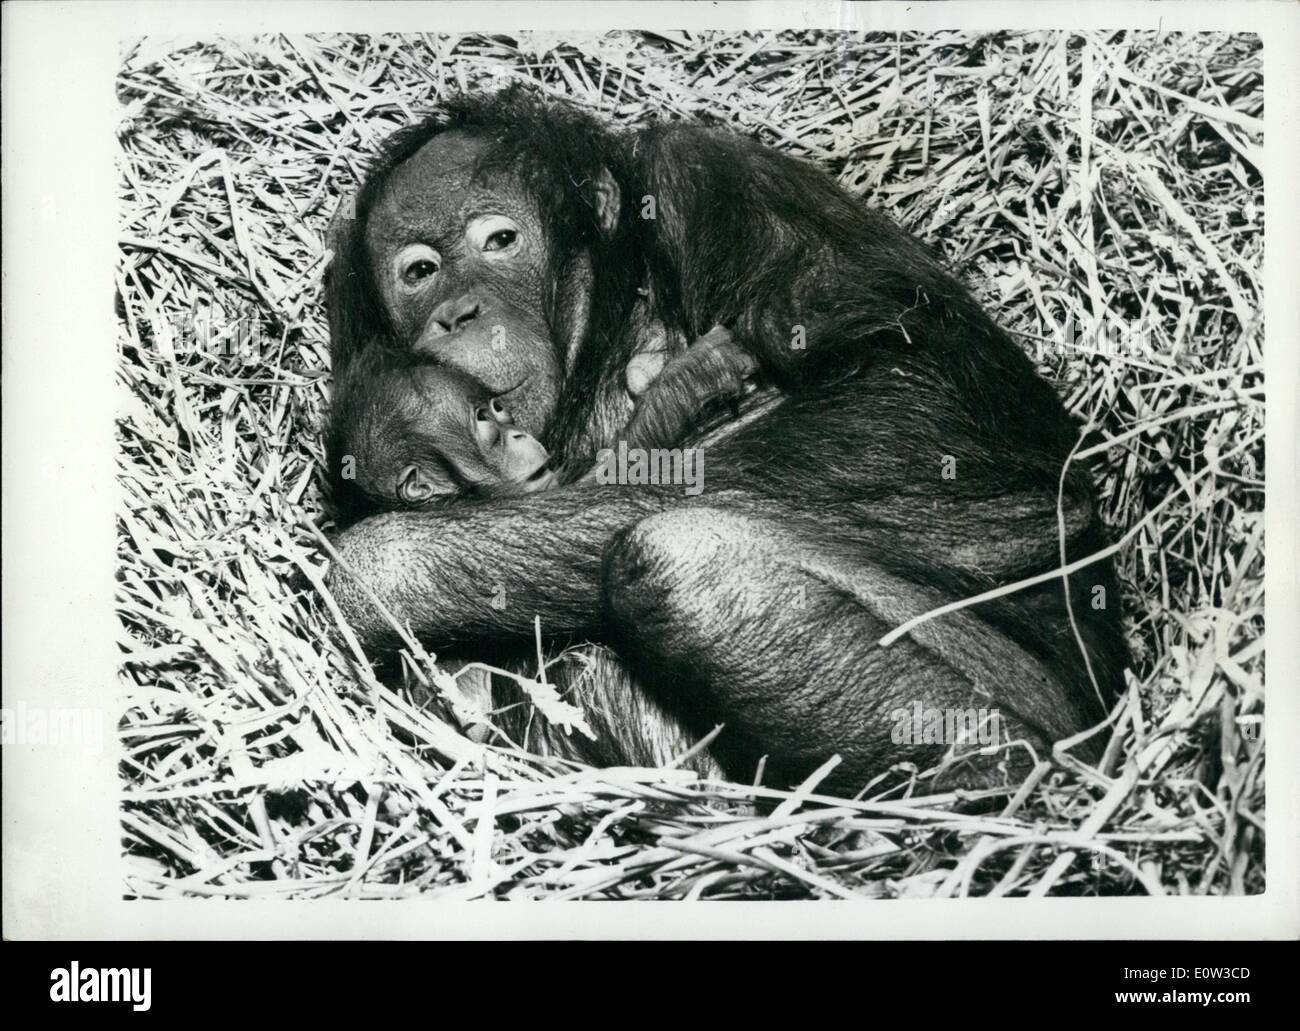 Mar. 03, 1961 - The First Orang Utan To Be born At The London Zoo: No Orang Utan has ever been successfully reared in the British Isles, so the London Zoo are taking very special care of the new female baby born to ''Toli'' and ''Charlie last Sunday. The section in which they live in the Monkey House is cordoned off to give them seclusion for the first week or two. Seven-and-a-half year old ''Toli'' came to London when she was a year old, and ''Charlie'' arrived when he was three Stock Photo